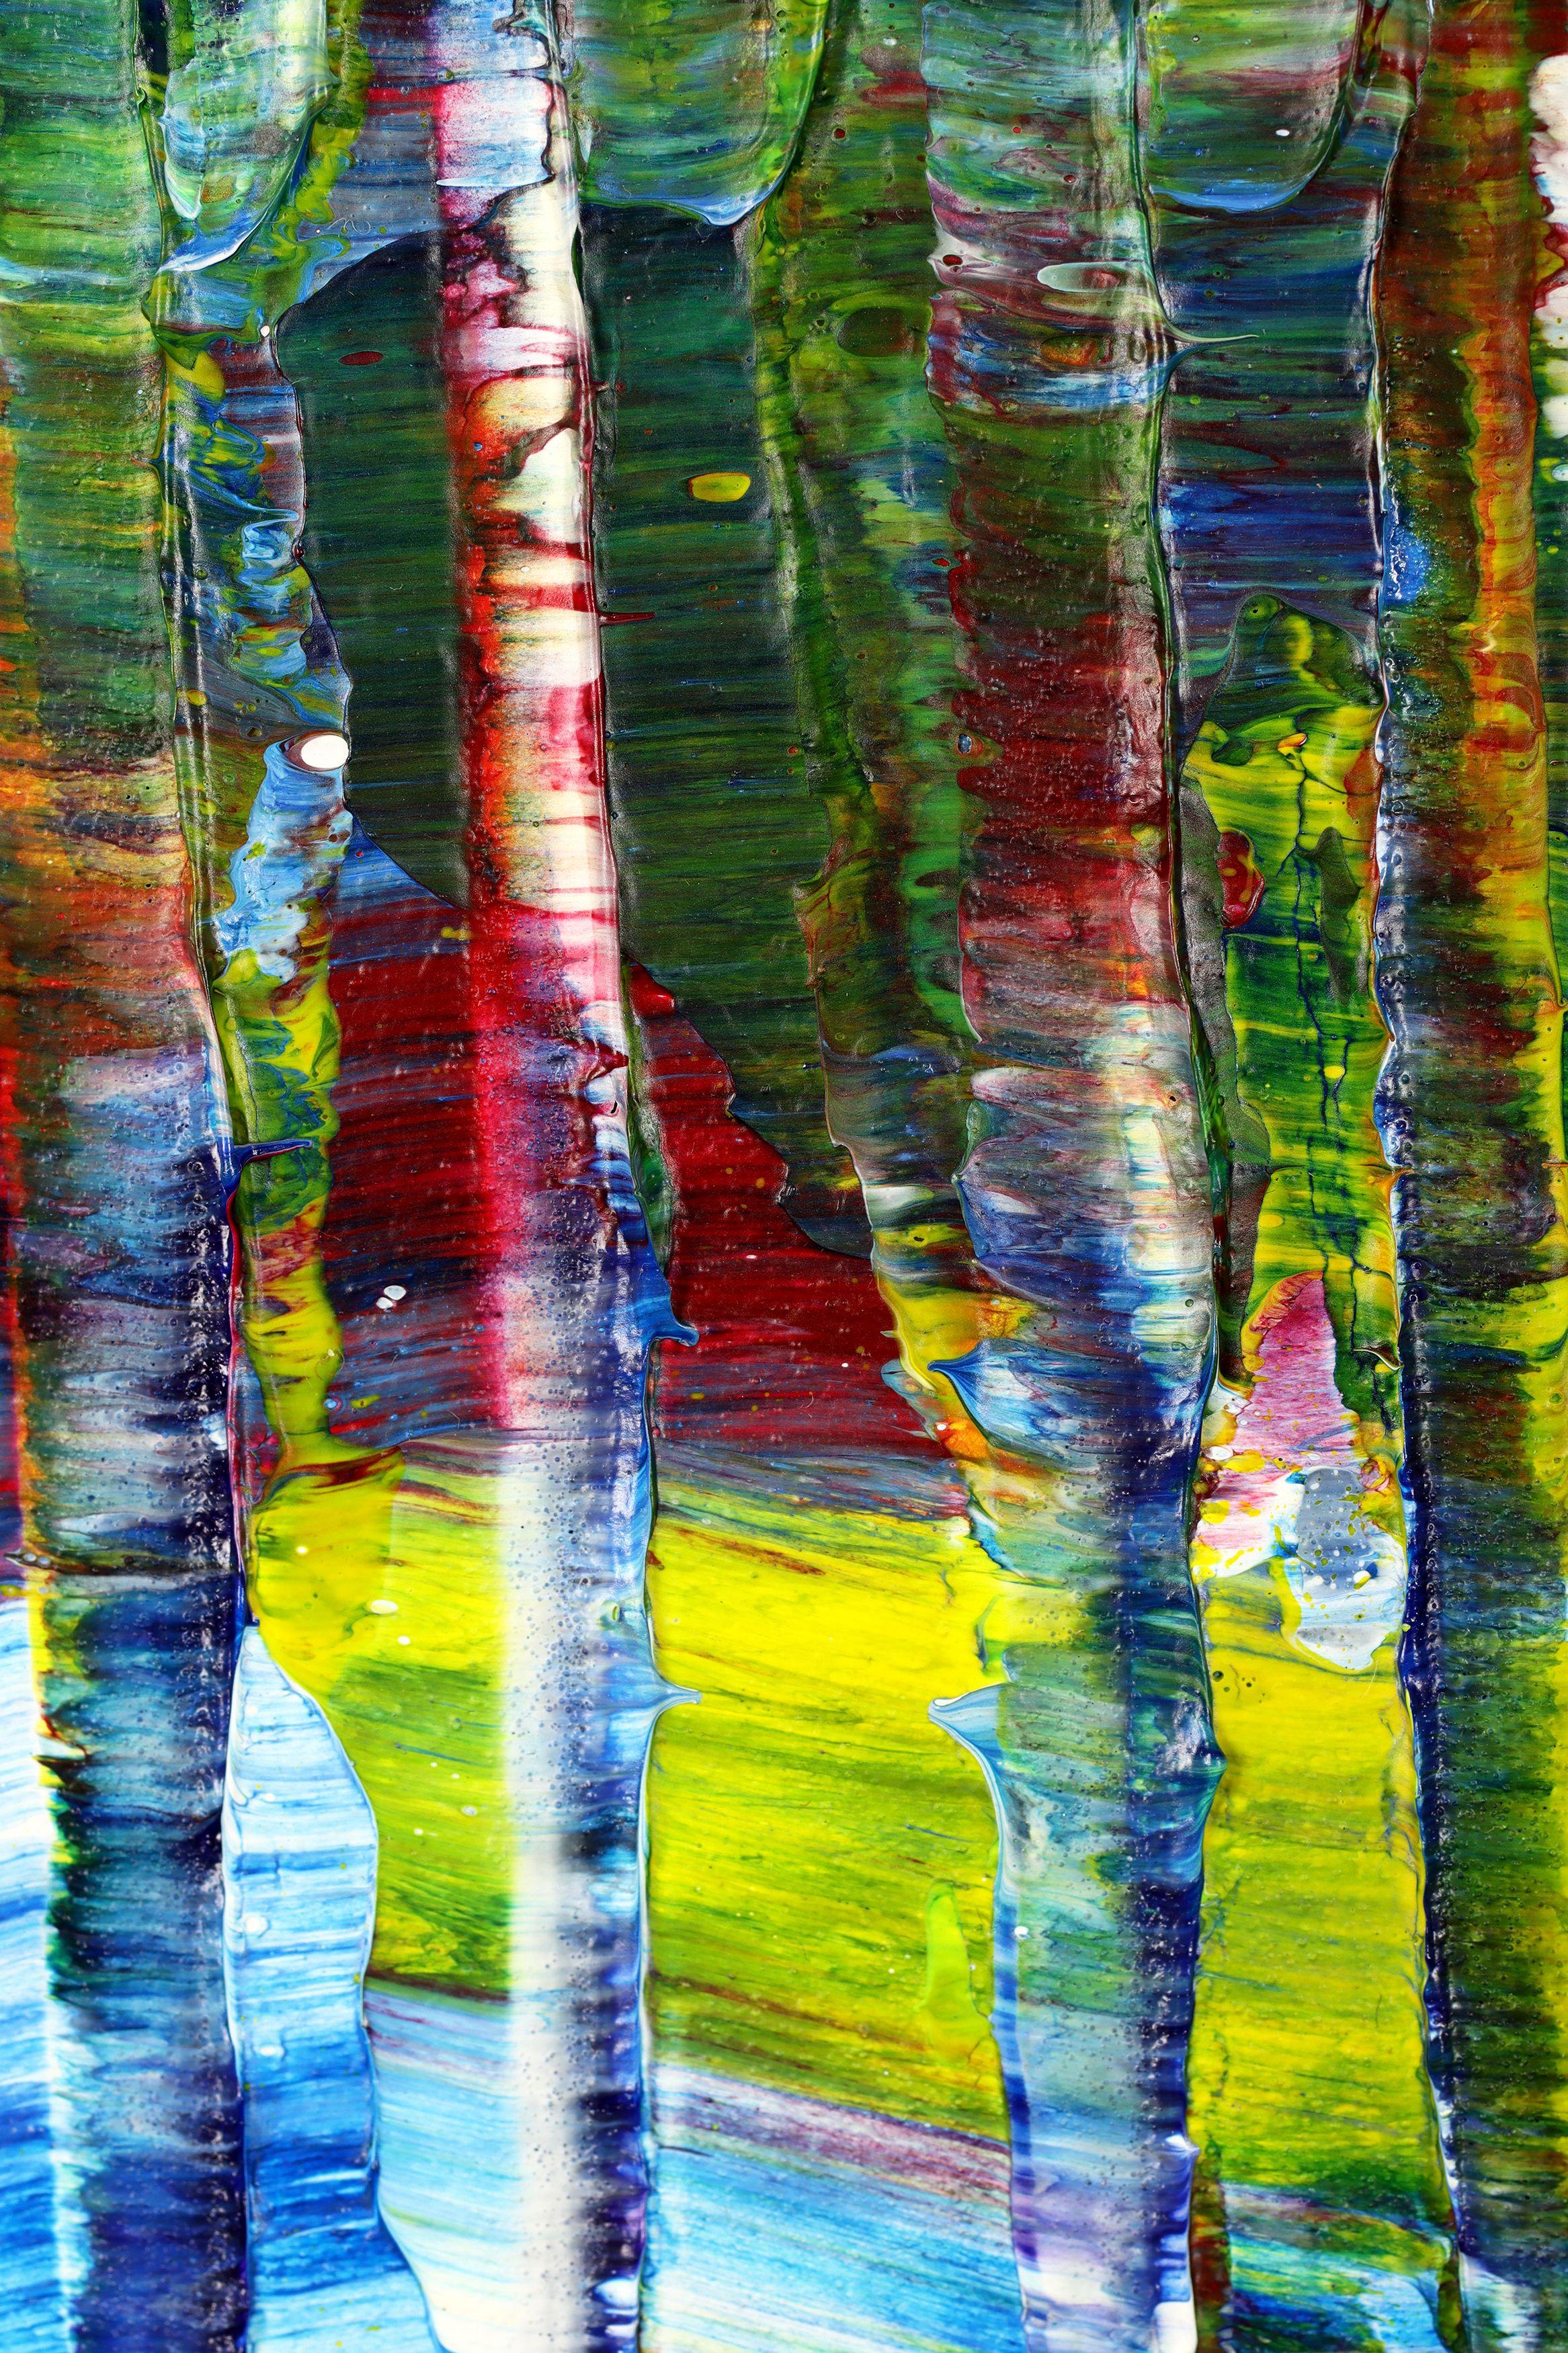 abstract painting  acrylic on canvas    This artwork was created layering and blending layers of blue, green, yellow, red. Signed and ready to hang.    For this work I used a large palette knife and hand mixed acrylic paint and mediums. The work is